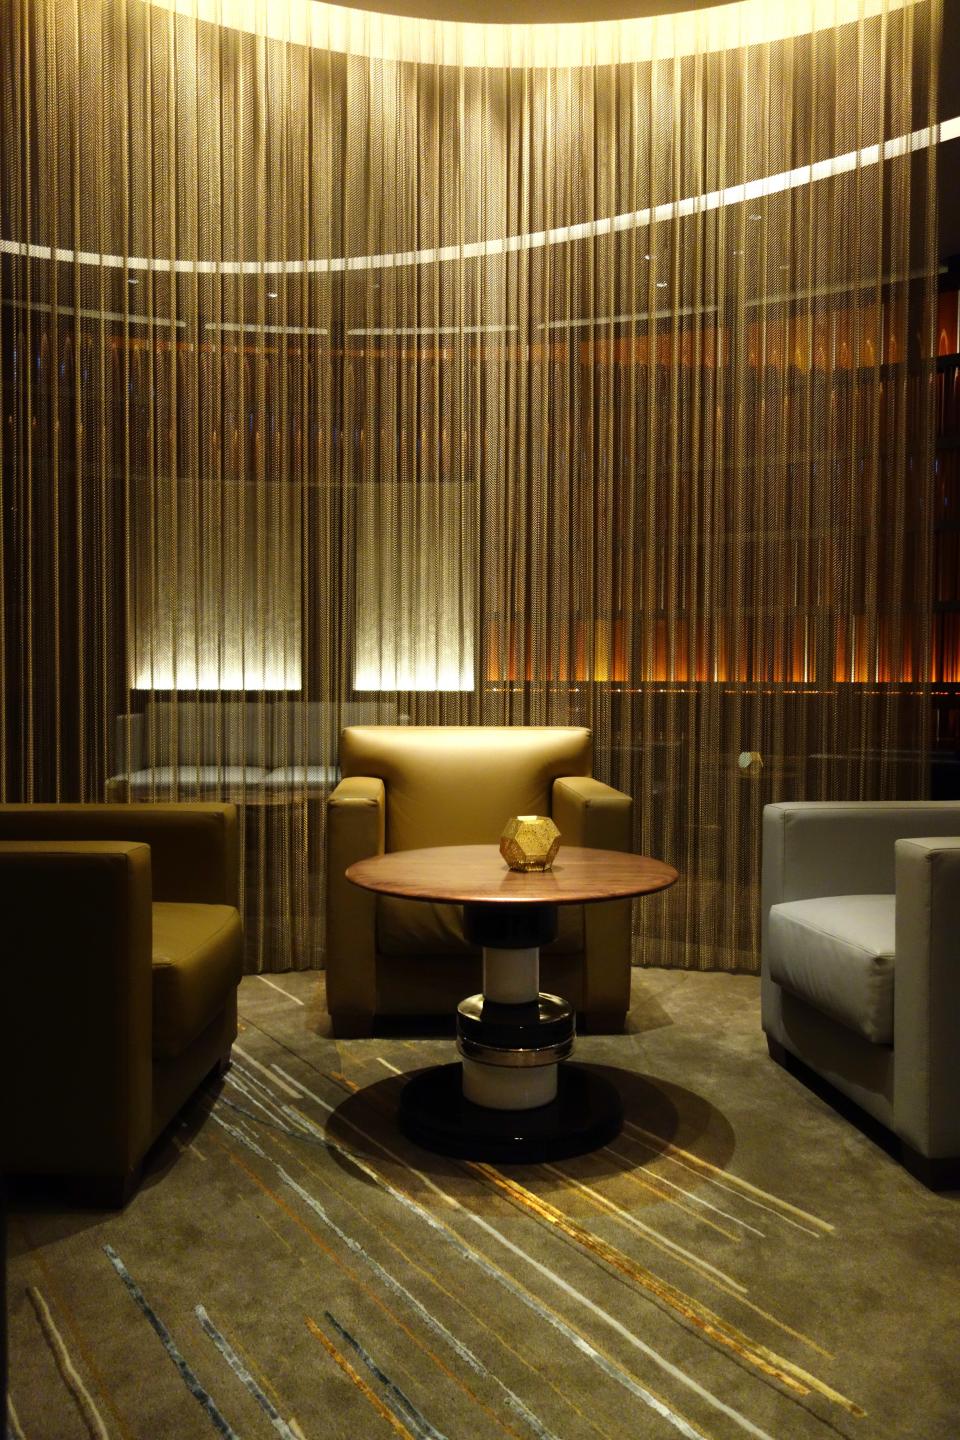 A bar at the Ritz-Carlton Wolfsburg, which Barnes redesigned in 2014.